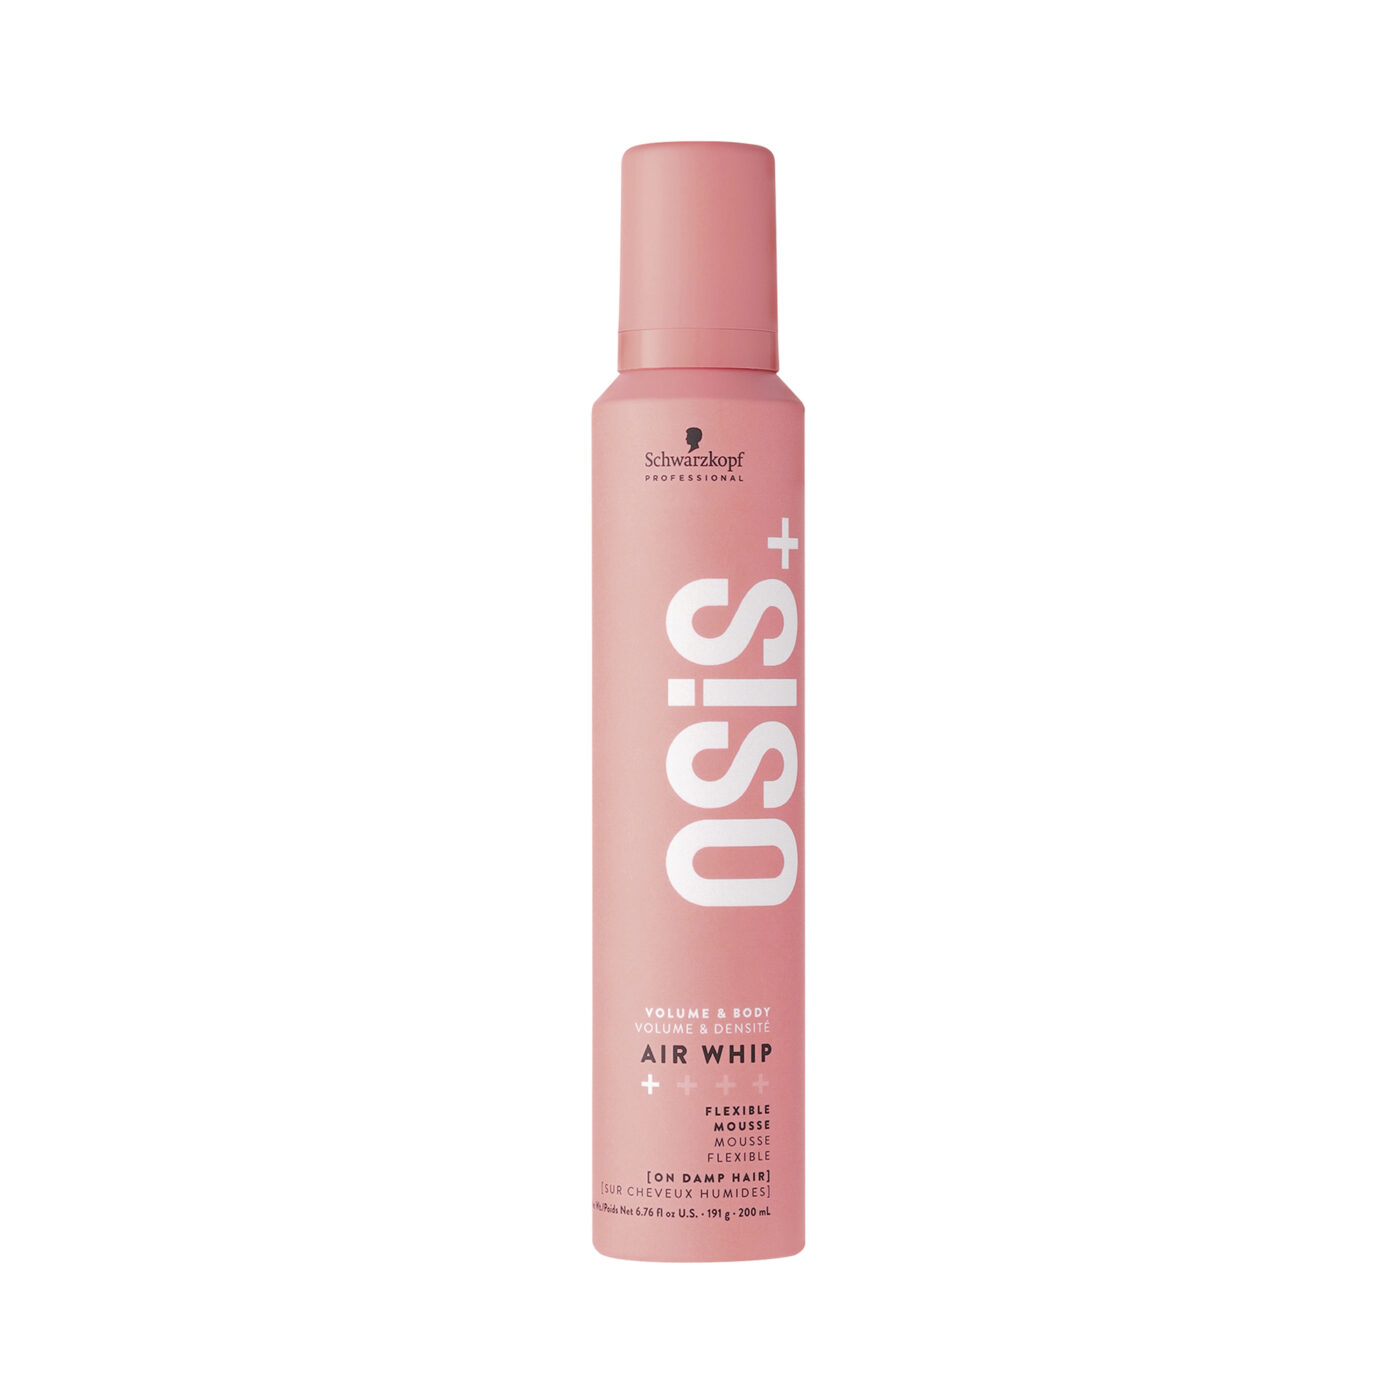 OSiS+ Air Whip Flexible Mousse 200ml